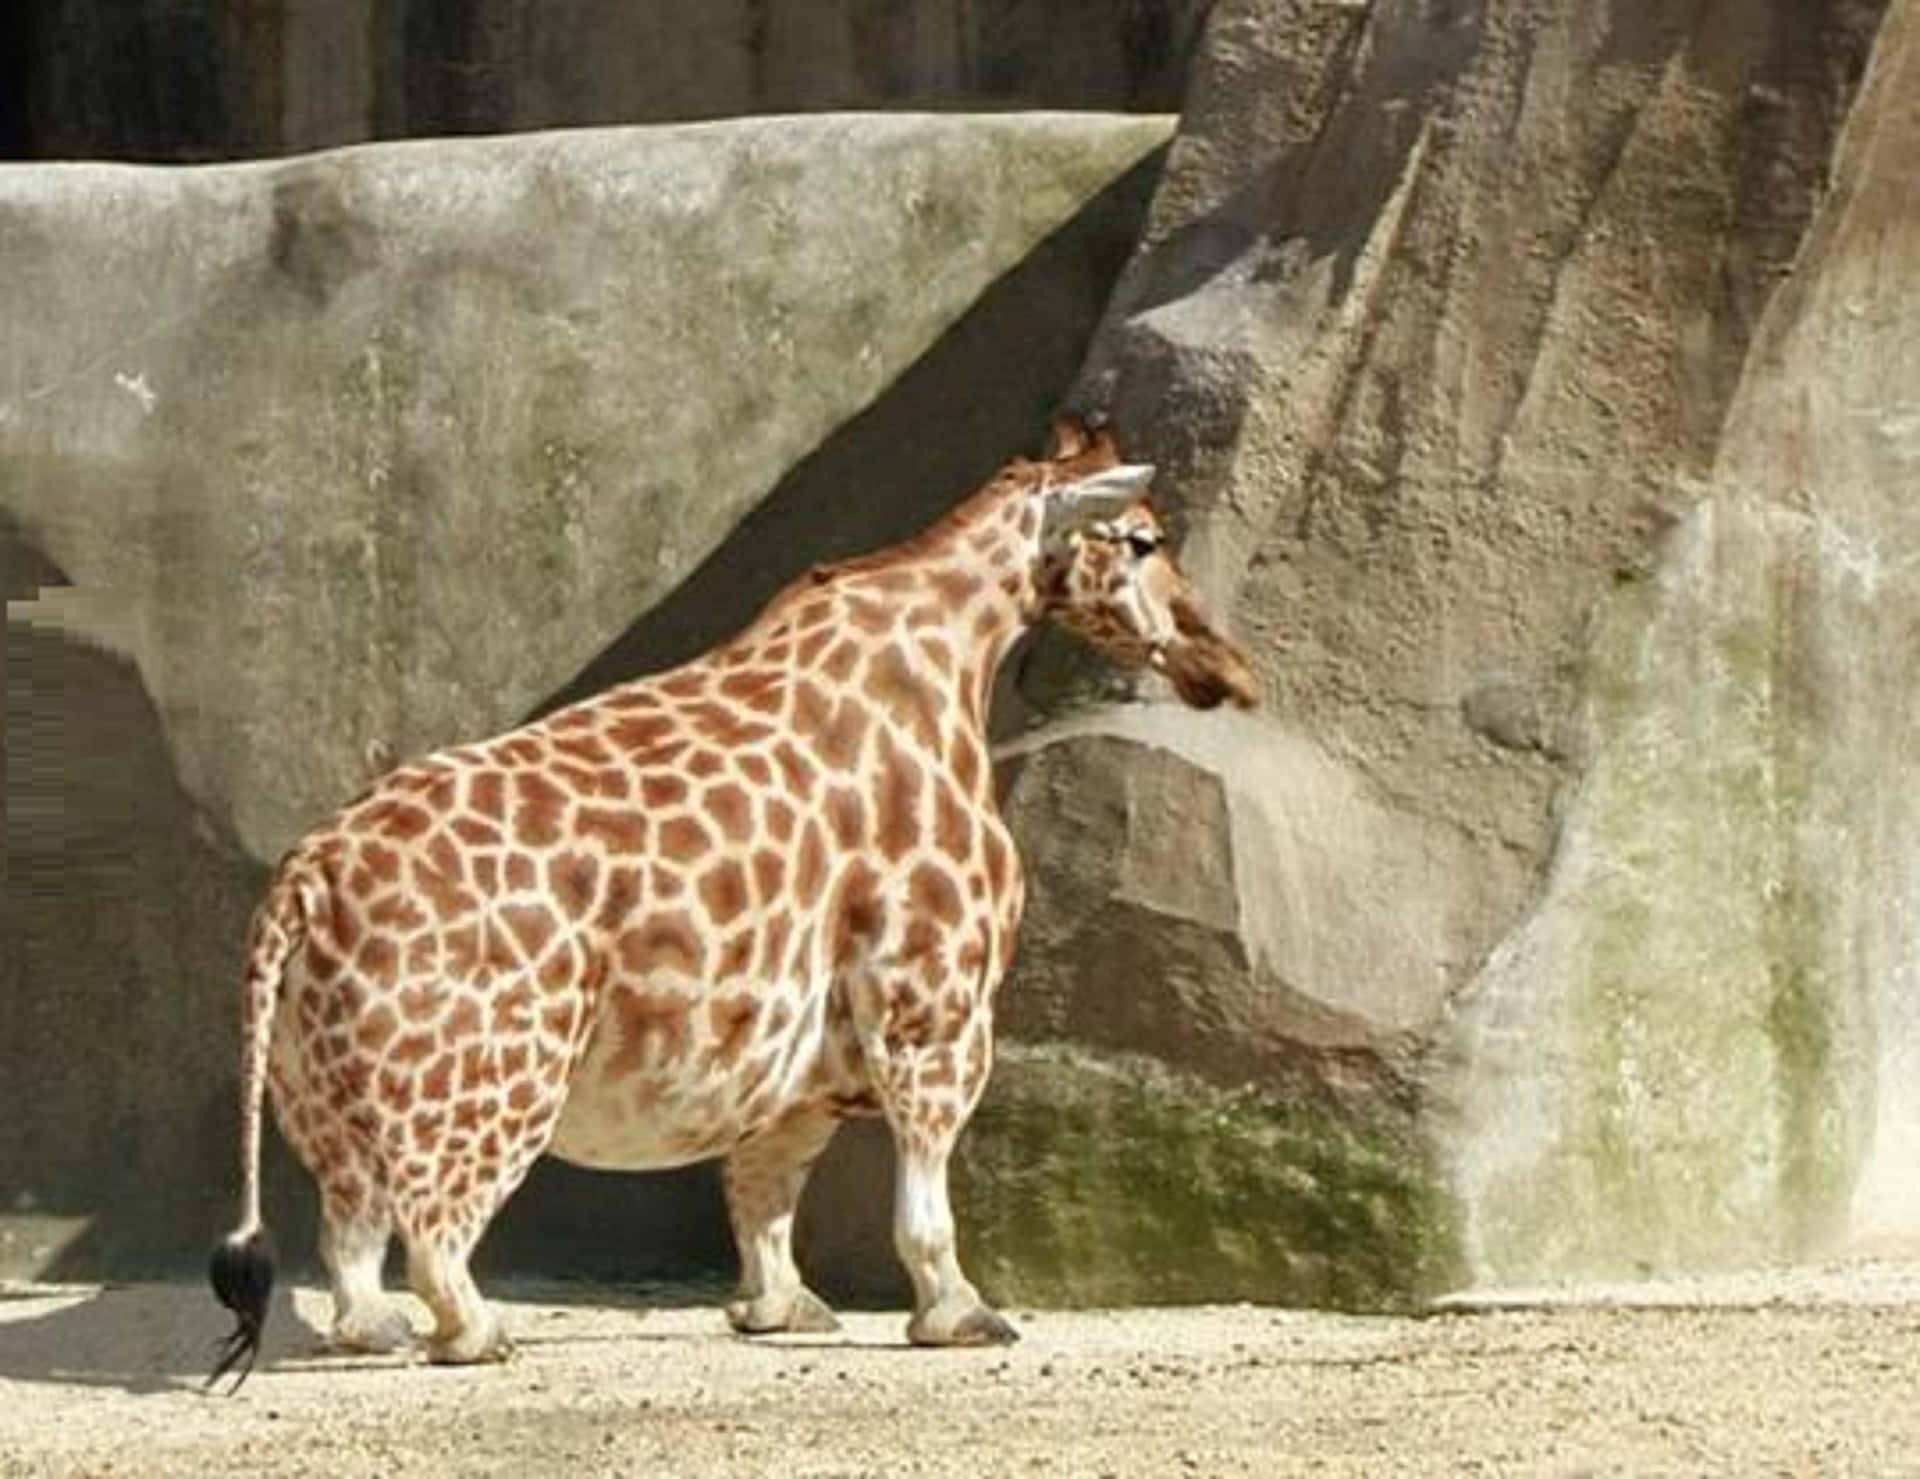 Funny Giraffe With Dwarfism Condition Wallpaper